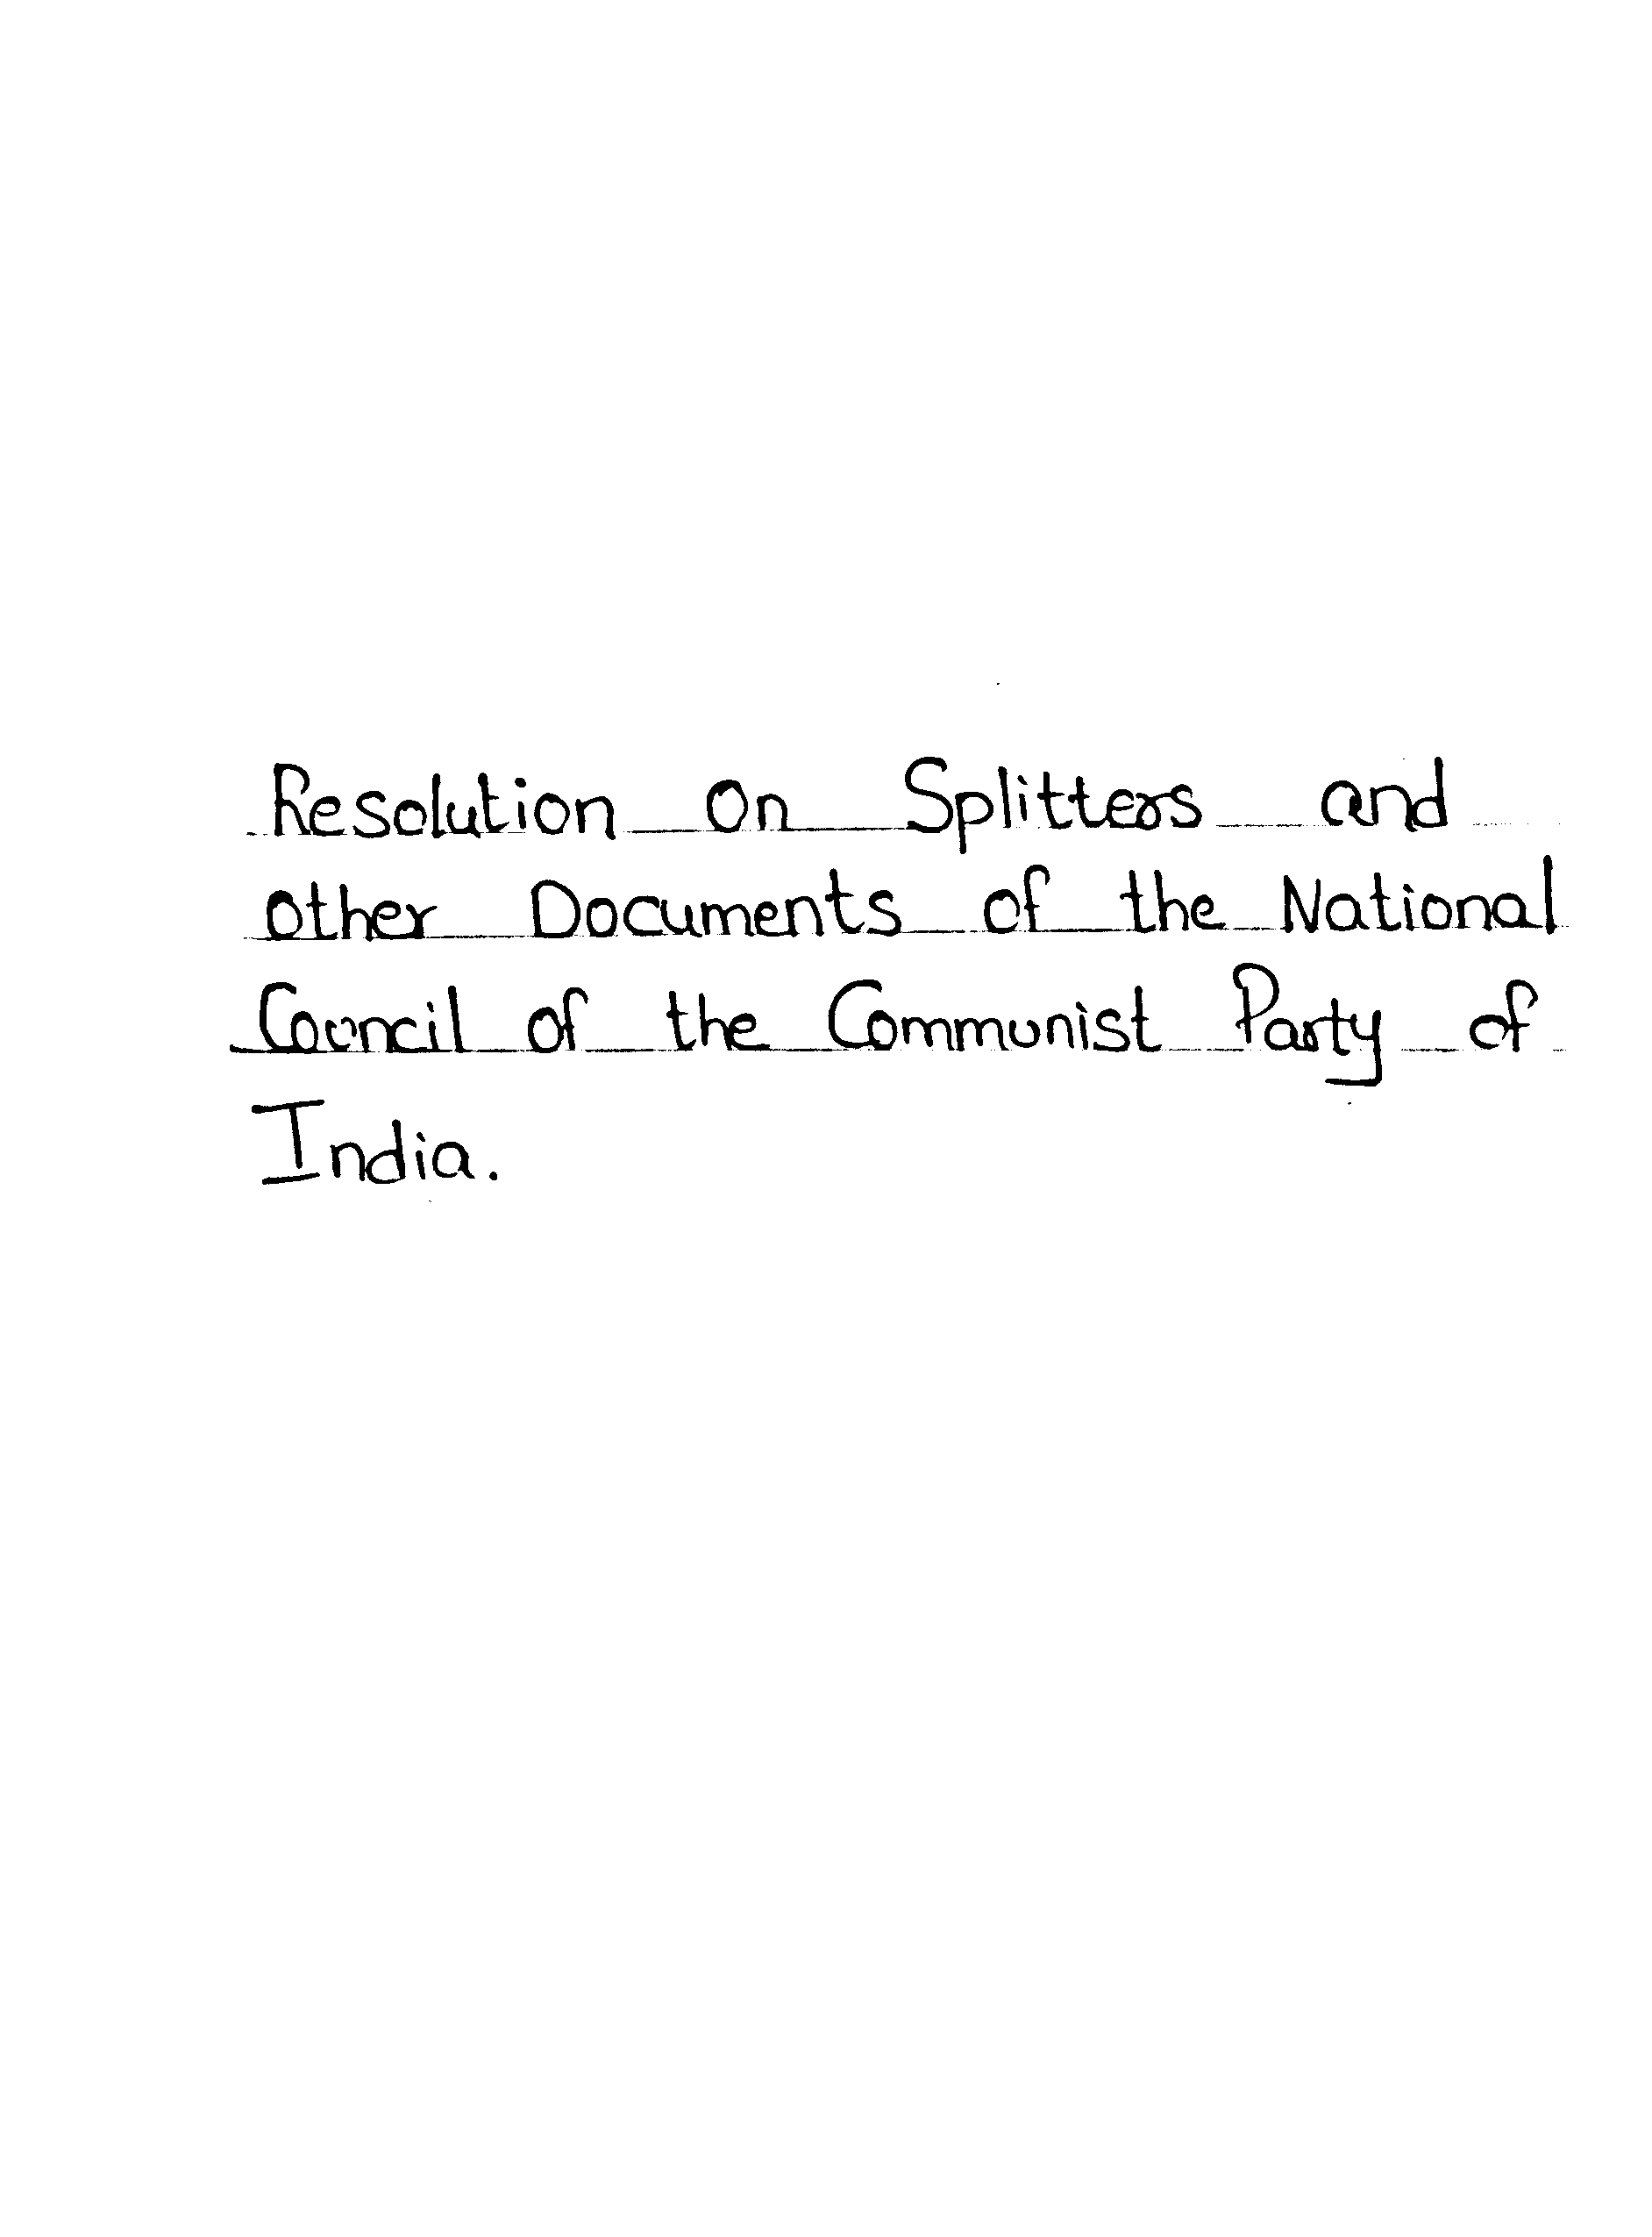 Resolution on Splitters and other Documents of the national council of the communist party of India